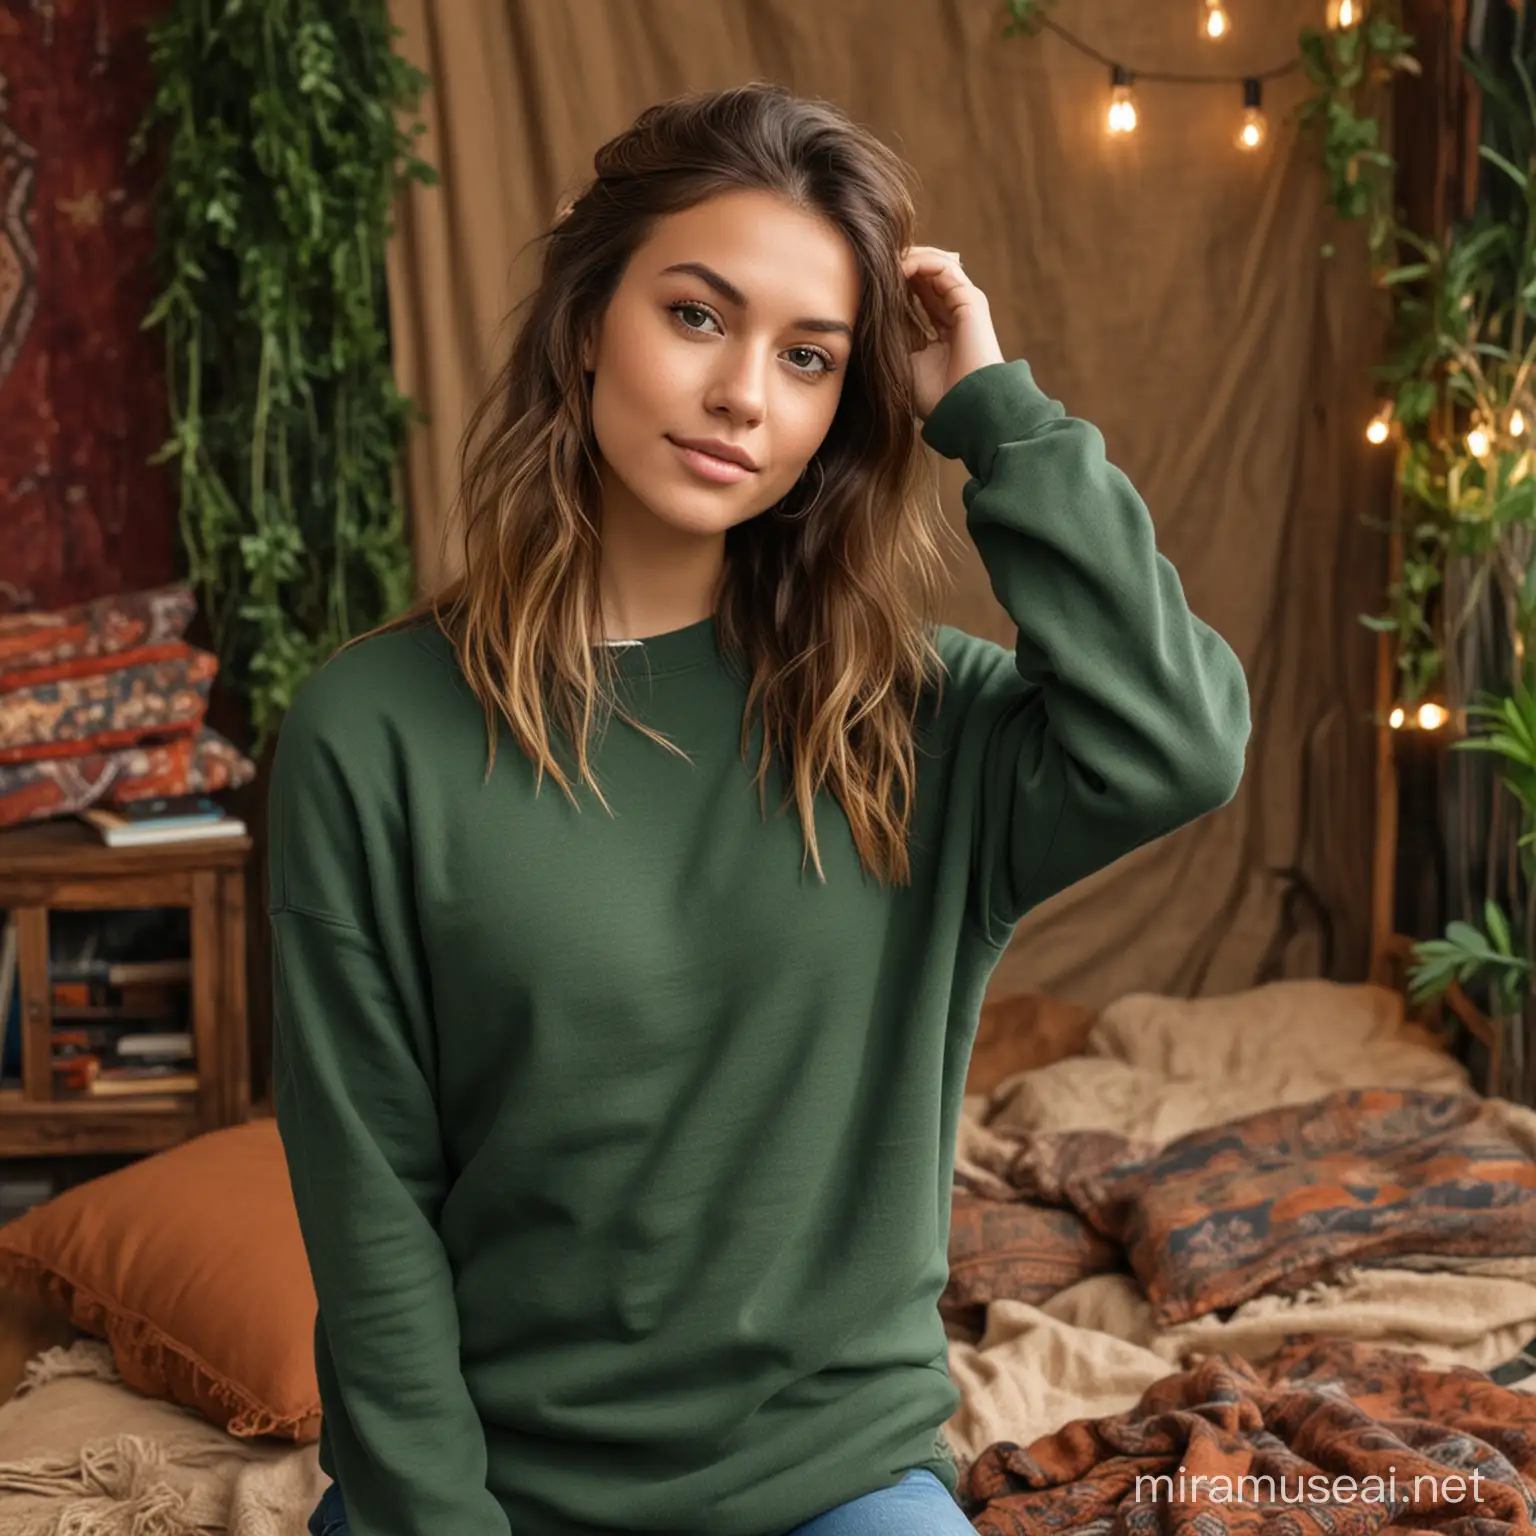 Boho Forest Green Crewneck Stylish Young Women in Cozy Attire